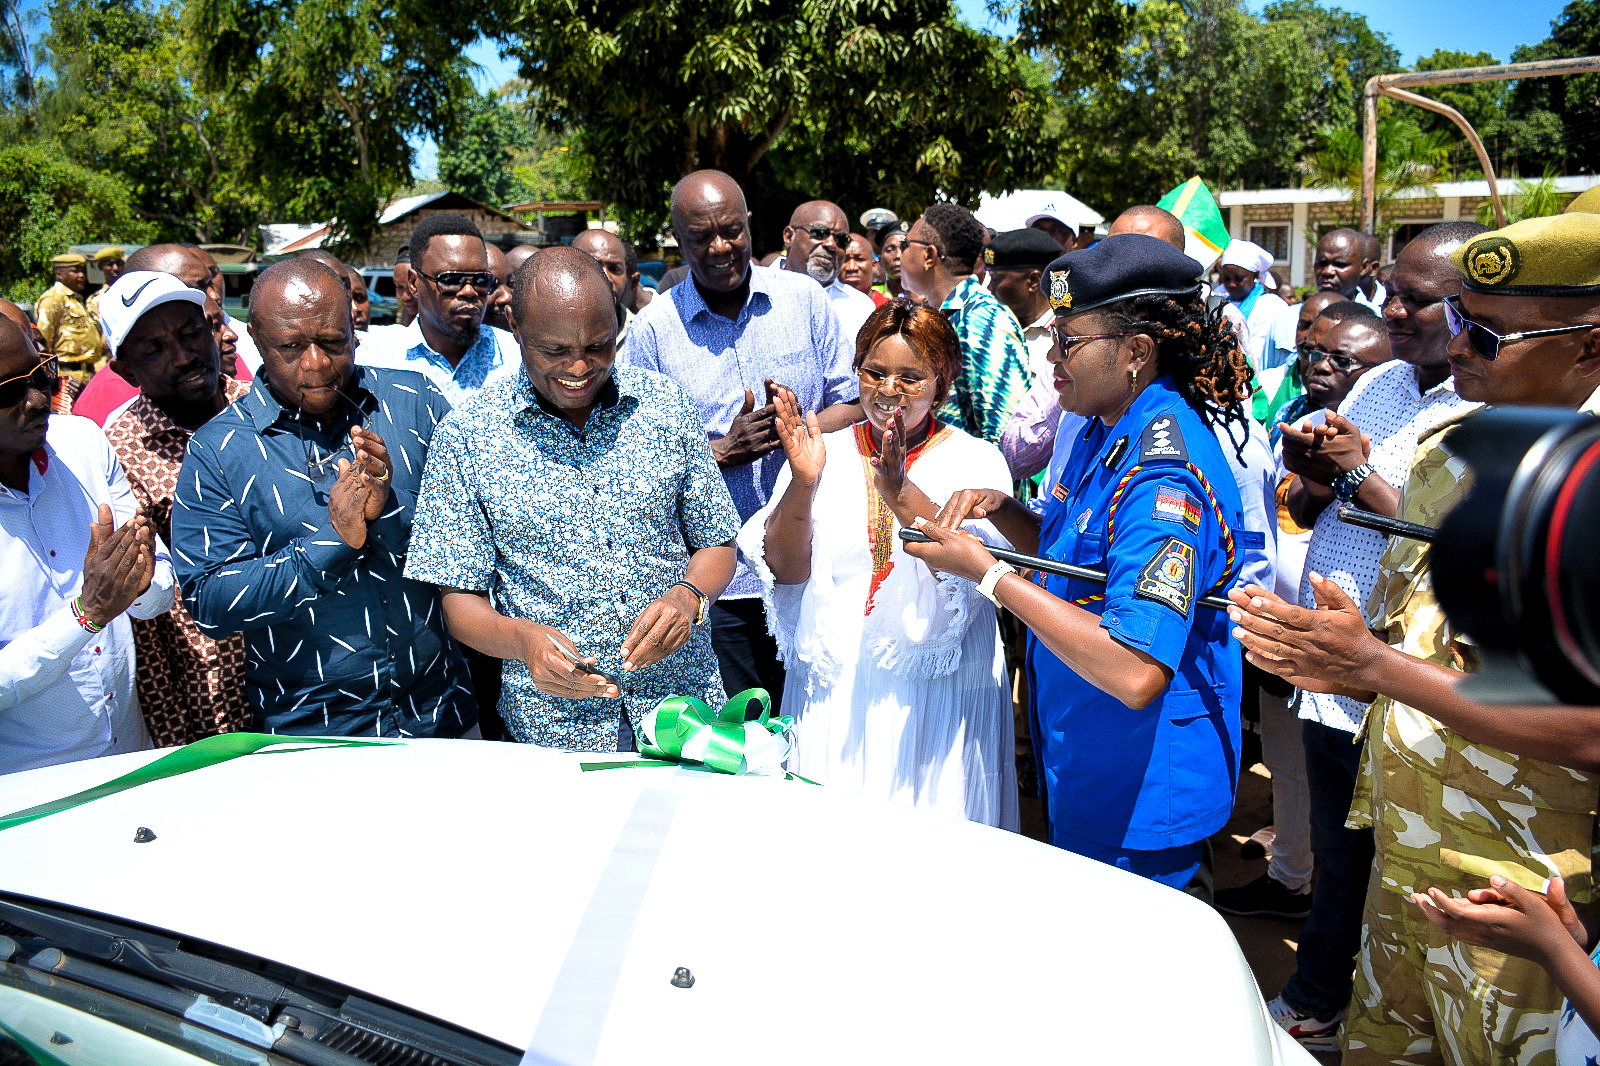 Chief of Staff and Head of Public Service, Felix Koskei (front row with blue short sleeved flowery shirt), cuts the ribbon for the donated patrol vehicle, as the Cabinet Secretary for Tourism, Wildlife and Heritage, Hon. Peninah Malonza, claps on (front row with white dress)